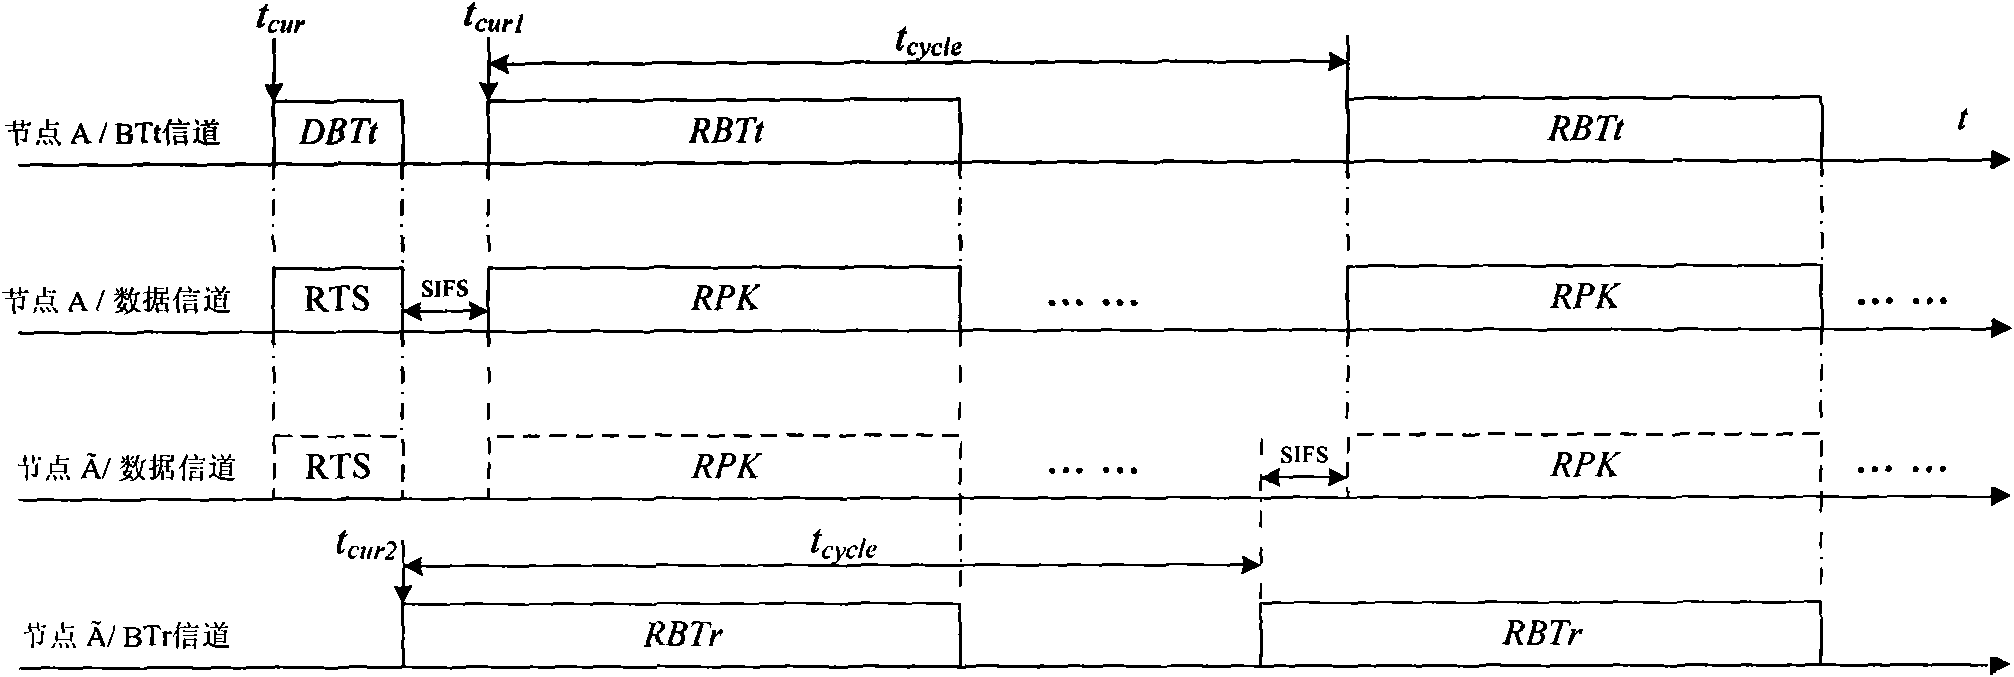 Channel reservation method based on double busy tone mechanism in wireless self-organizing network